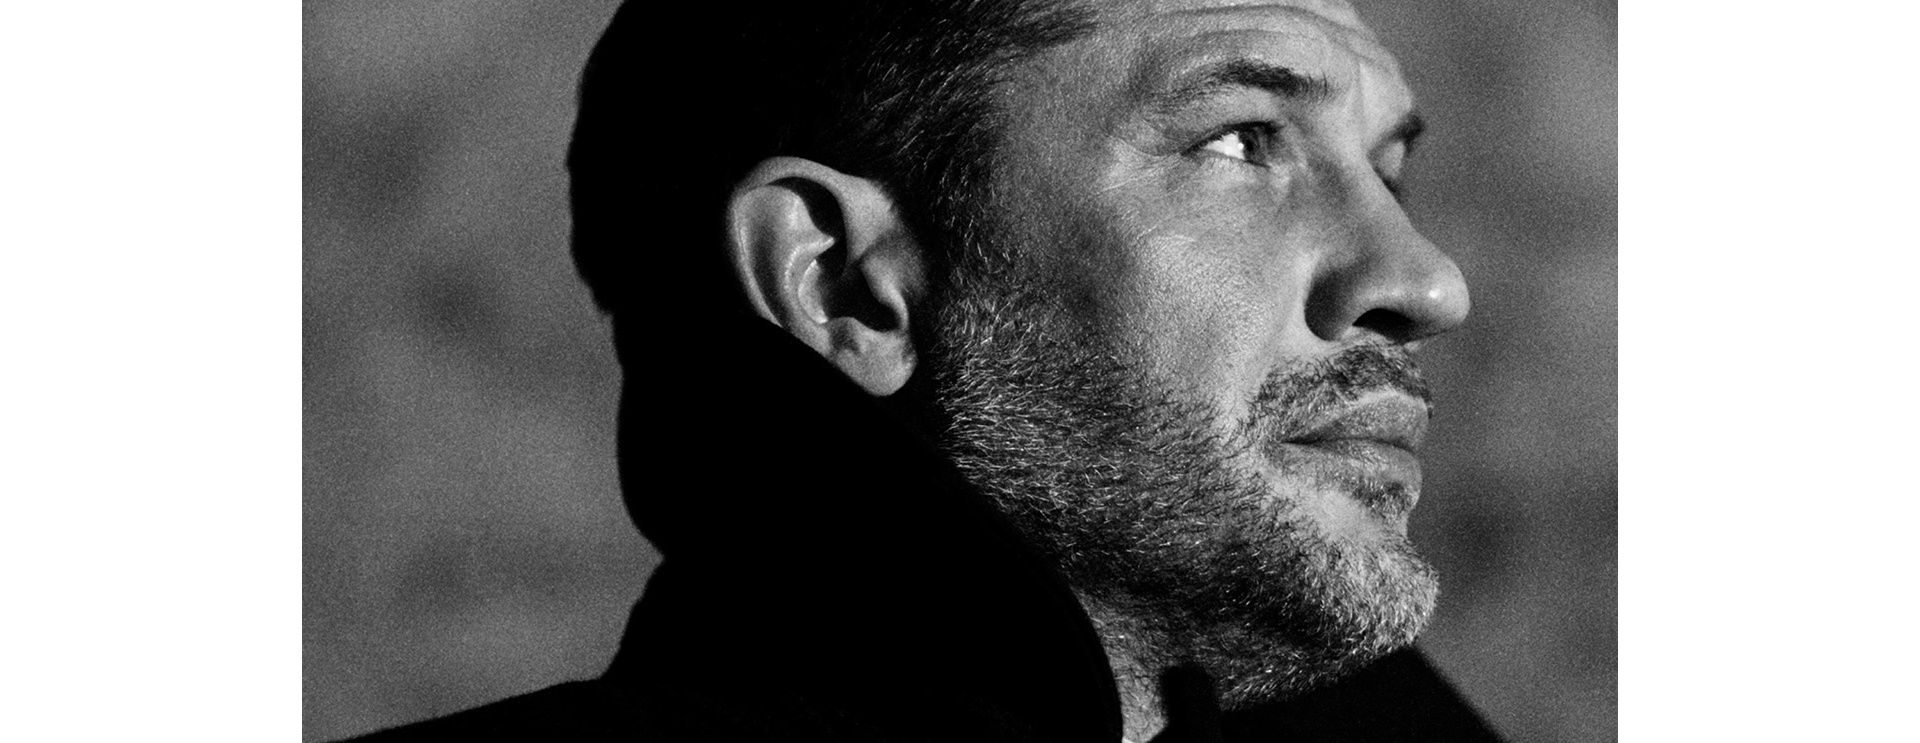  Introducing Tom Hardy for Jo Malone London